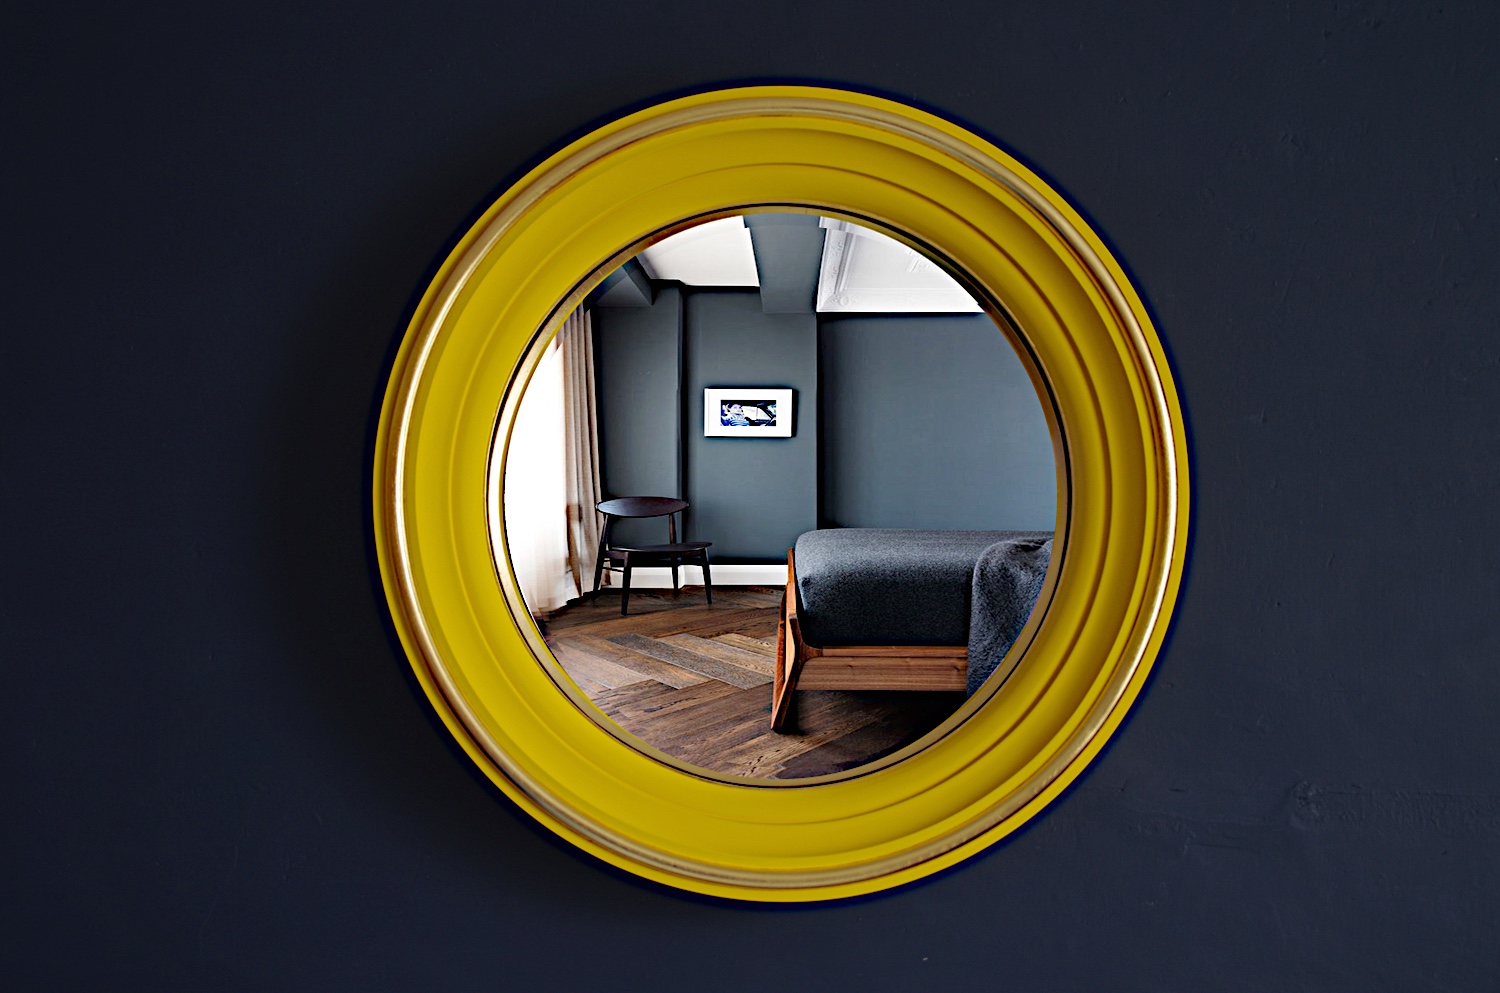 convex mirror with yellow frame hanging on dark blue wall image